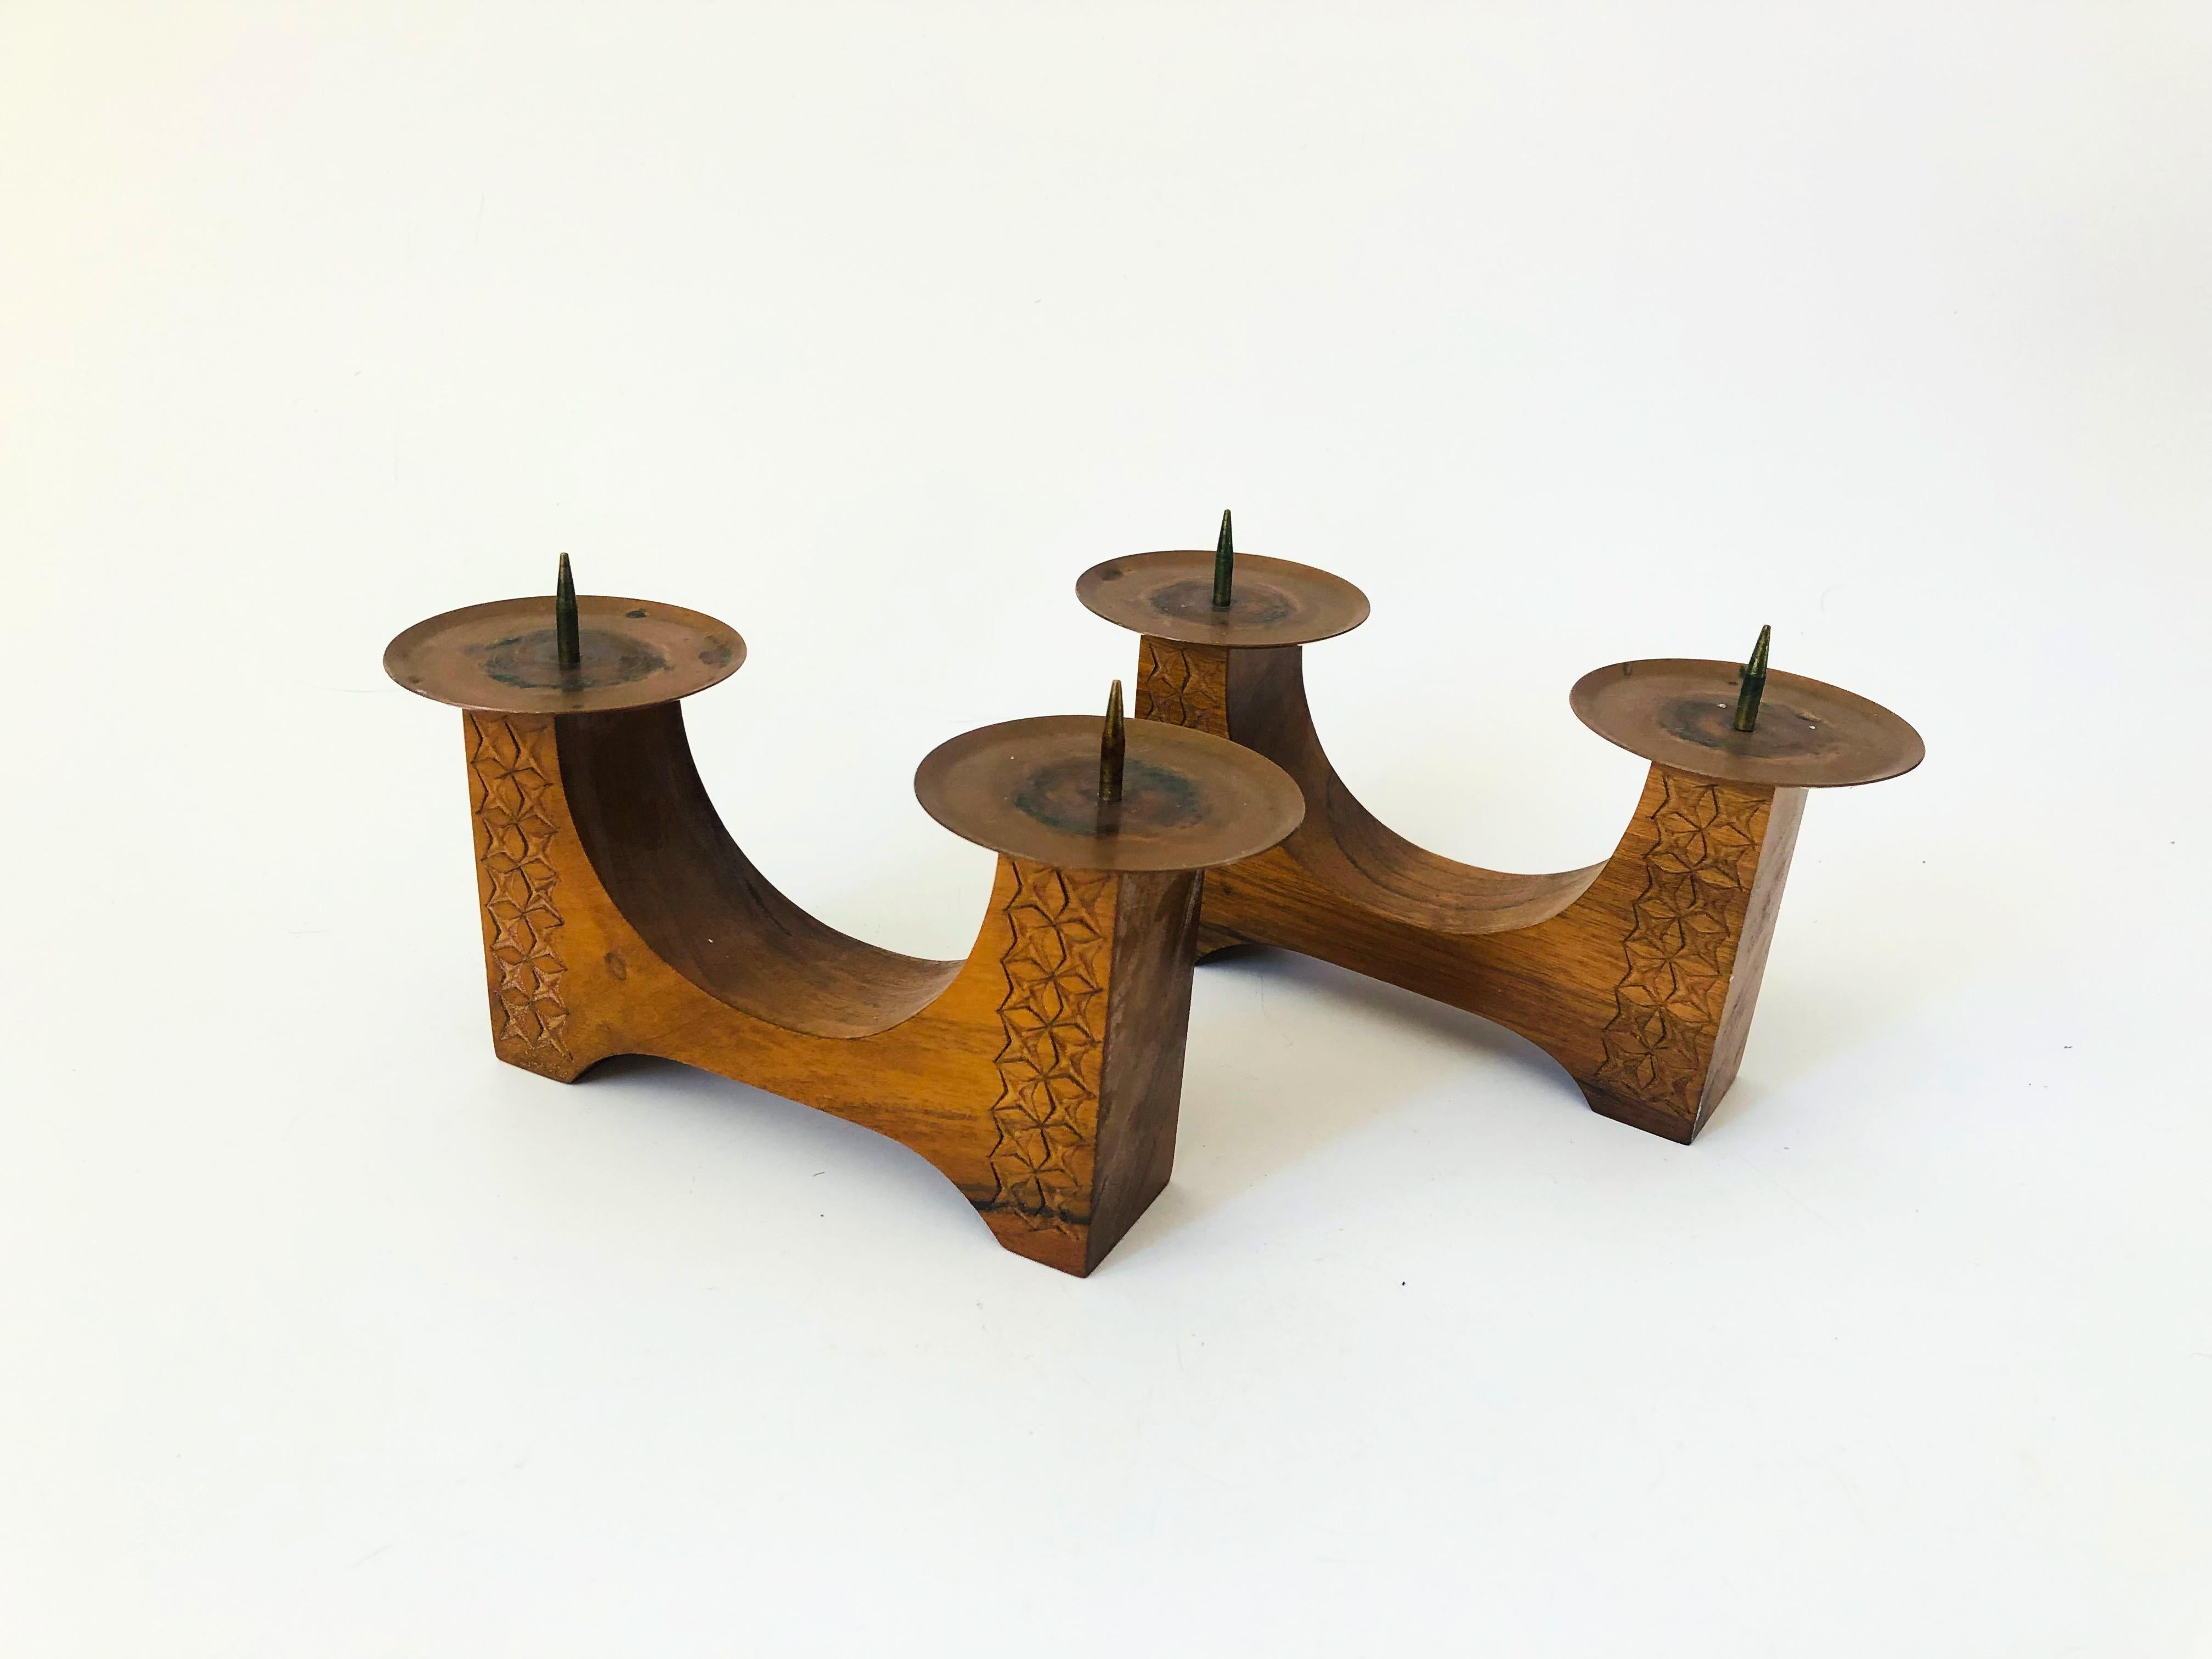 A pair of vintage wood candle holders. Each has a lovely carved design on the sides with copper tops for holding 2 candles each.
 